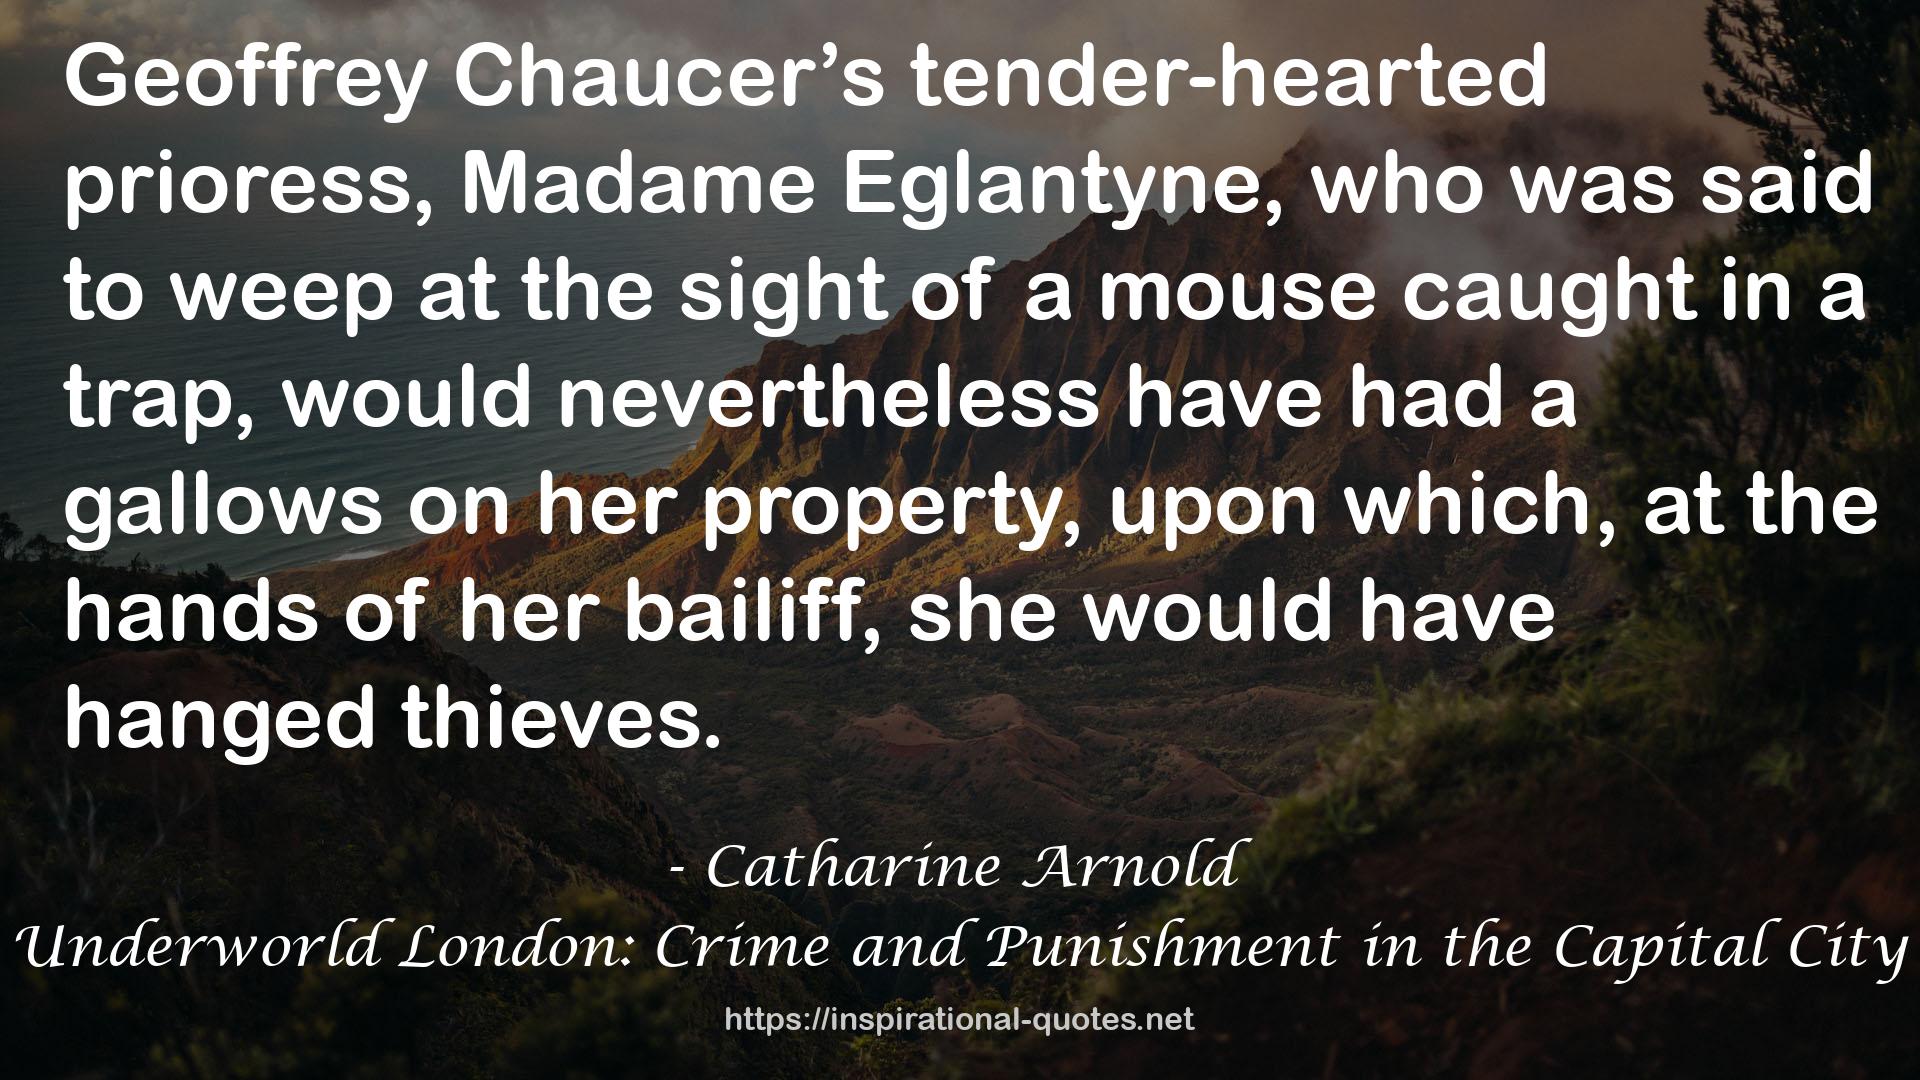 Underworld London: Crime and Punishment in the Capital City QUOTES